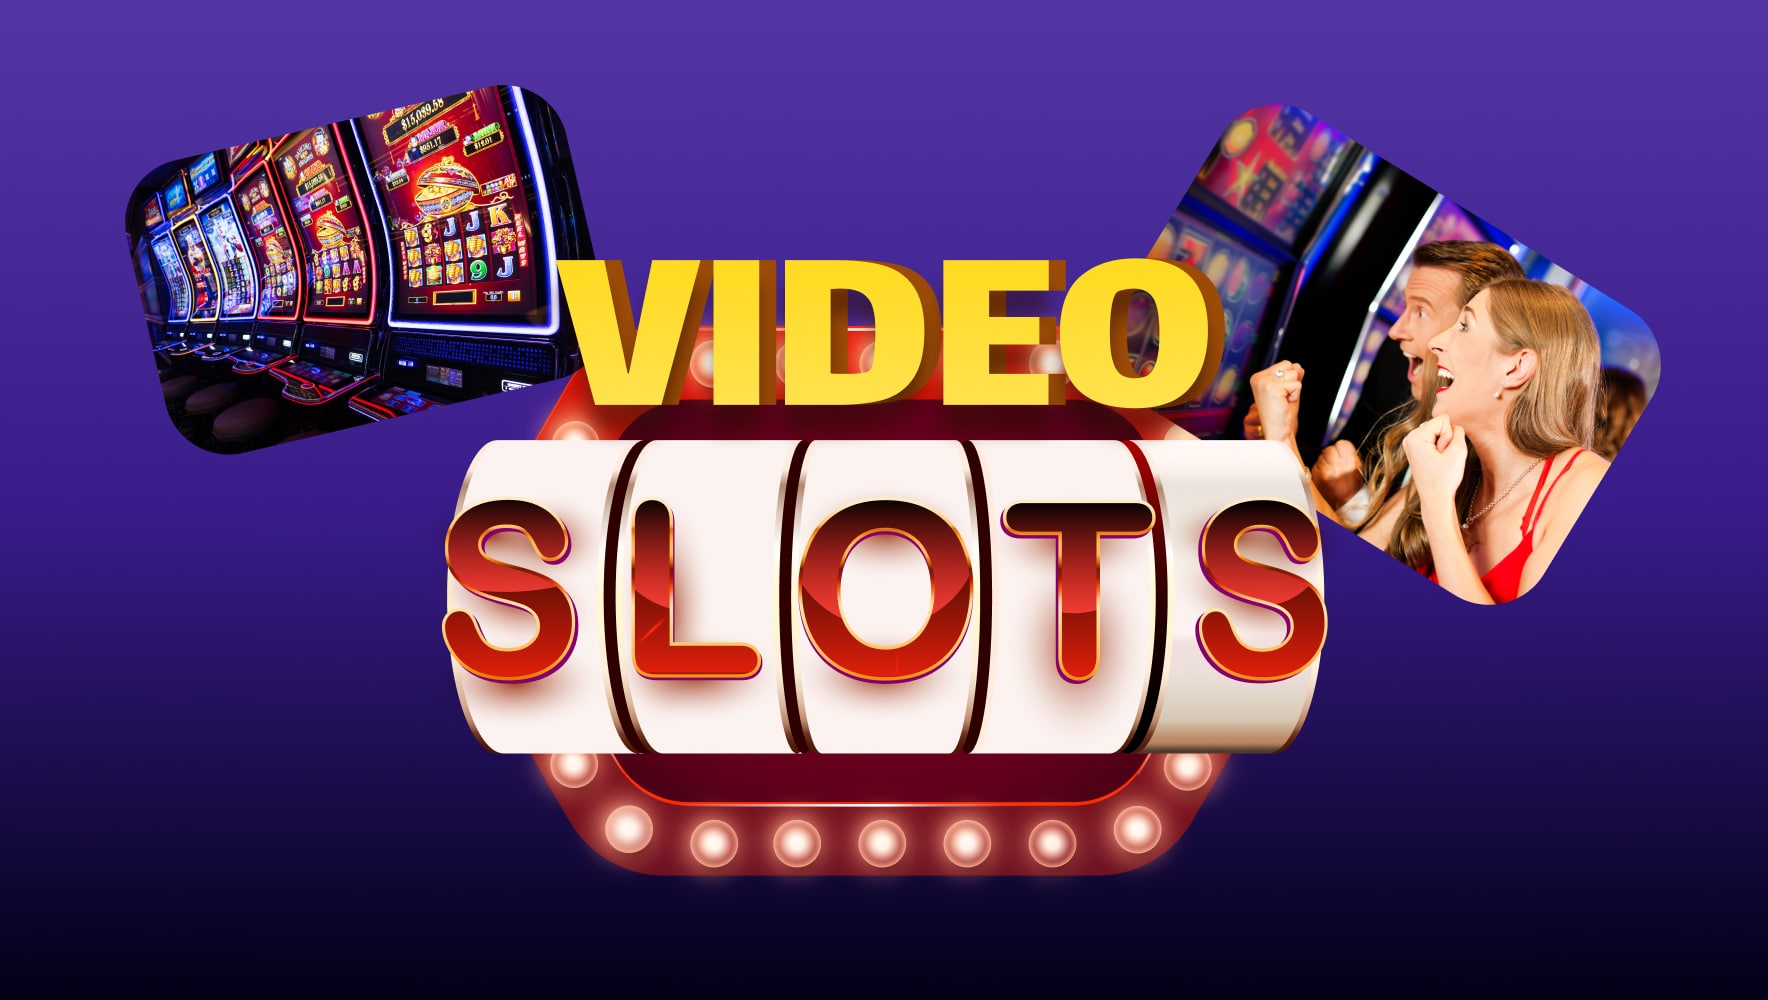 Visual Representation For The Article Titled Vegas Slots